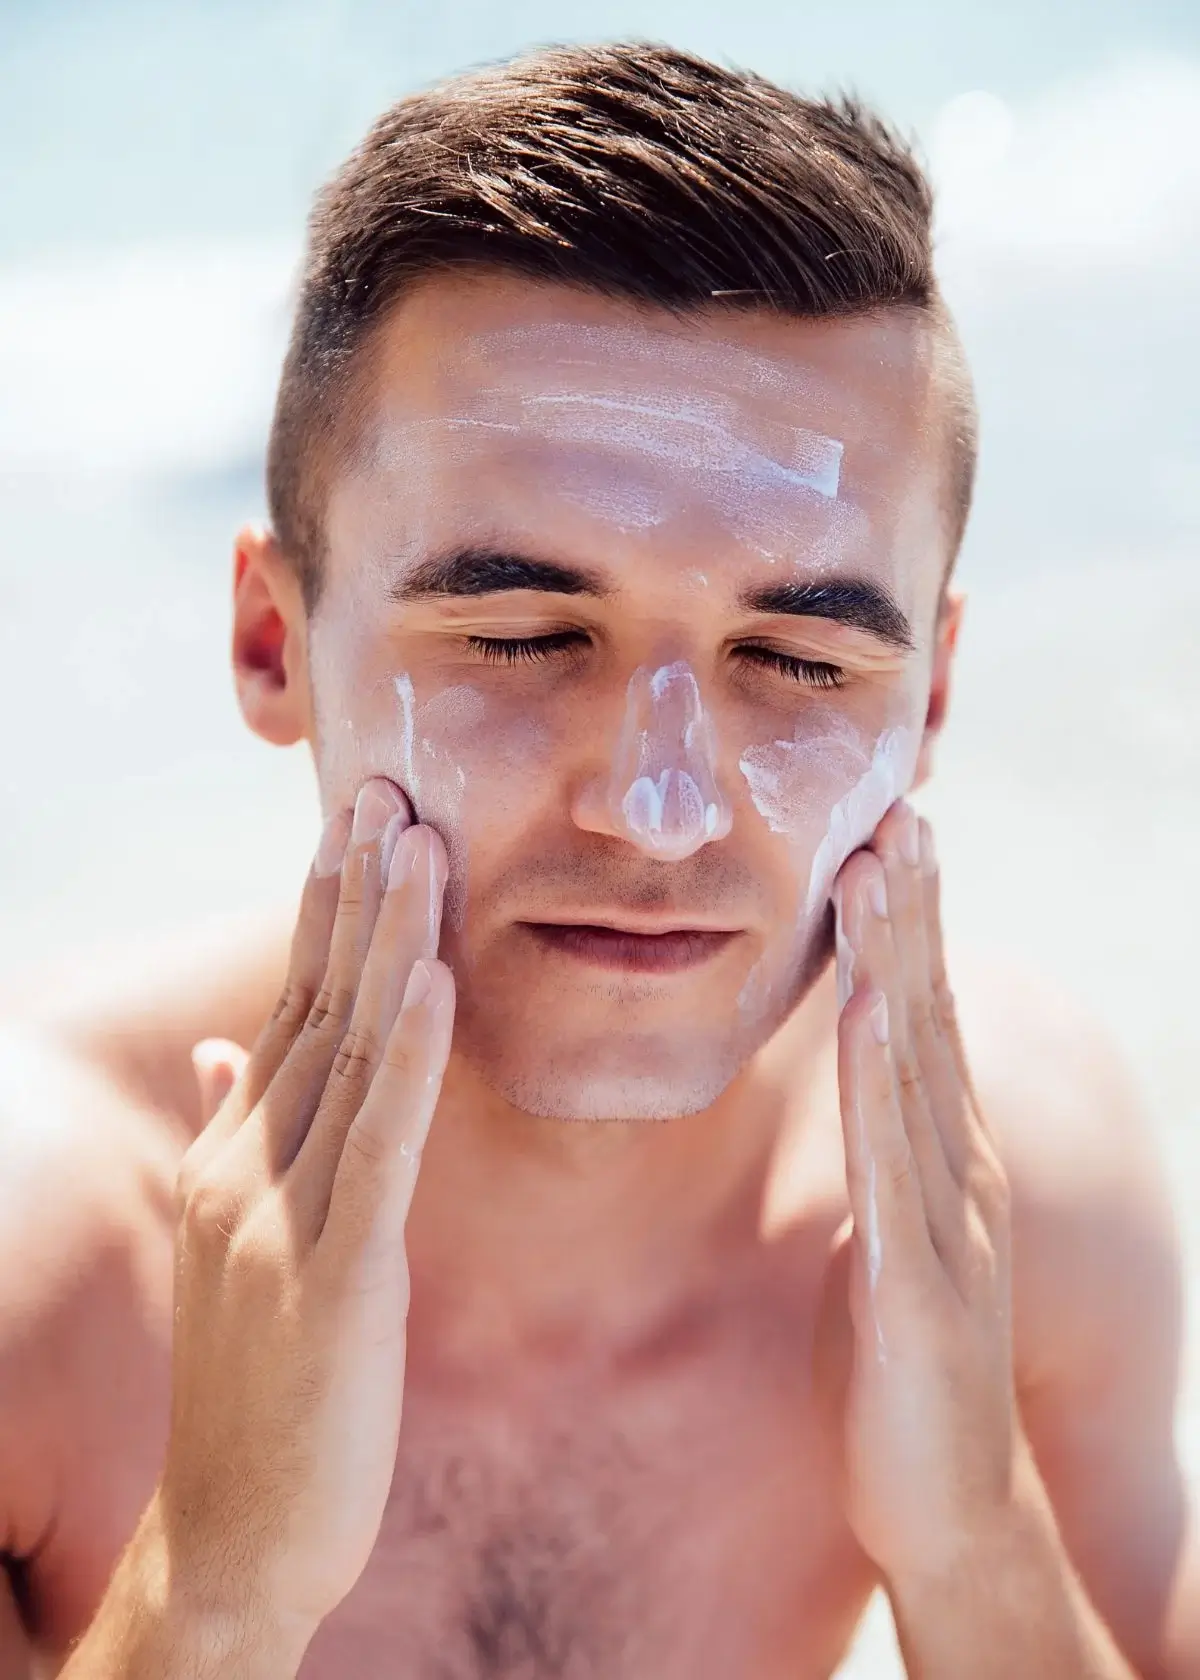 How to choose the right mens face sunscreen?